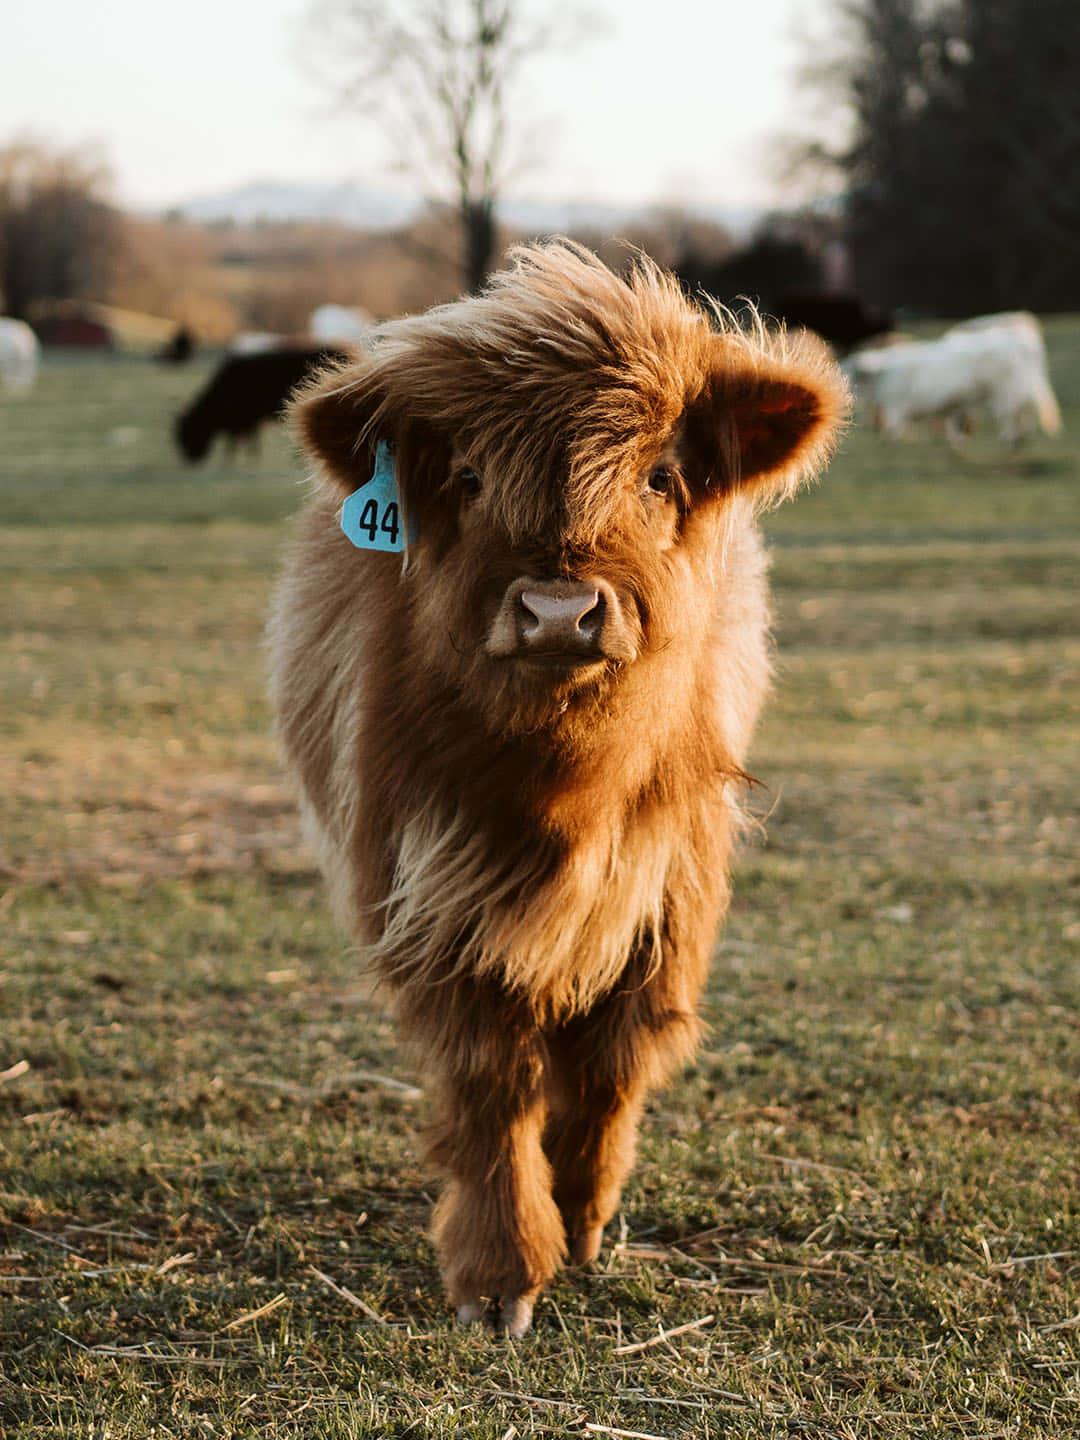 An Adorable Cow Gazing into the Distance